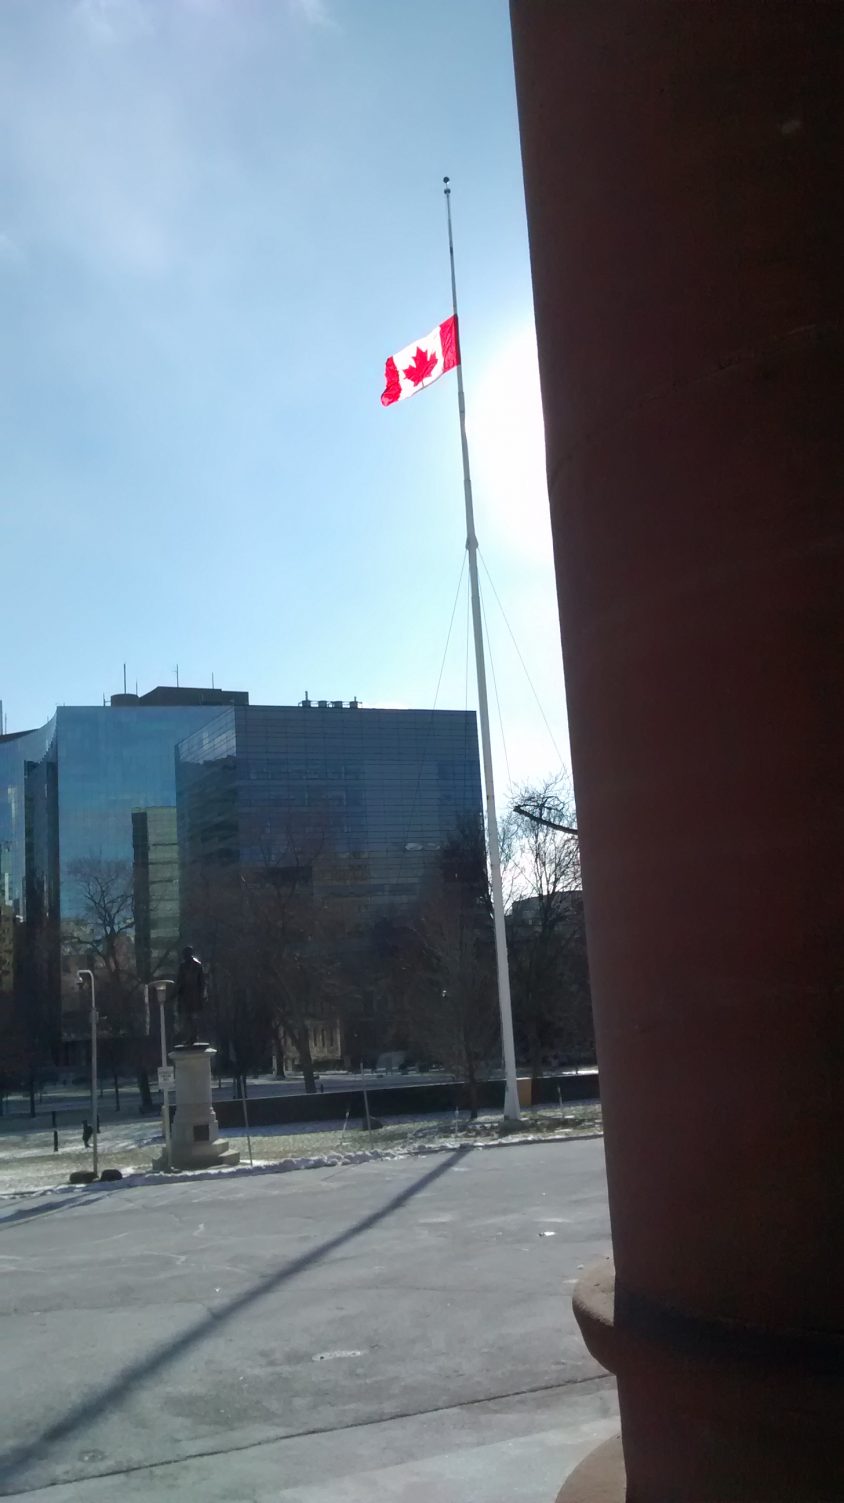 Seen: Flags at half-mast in remembrance of former MPP Eric Cunningham